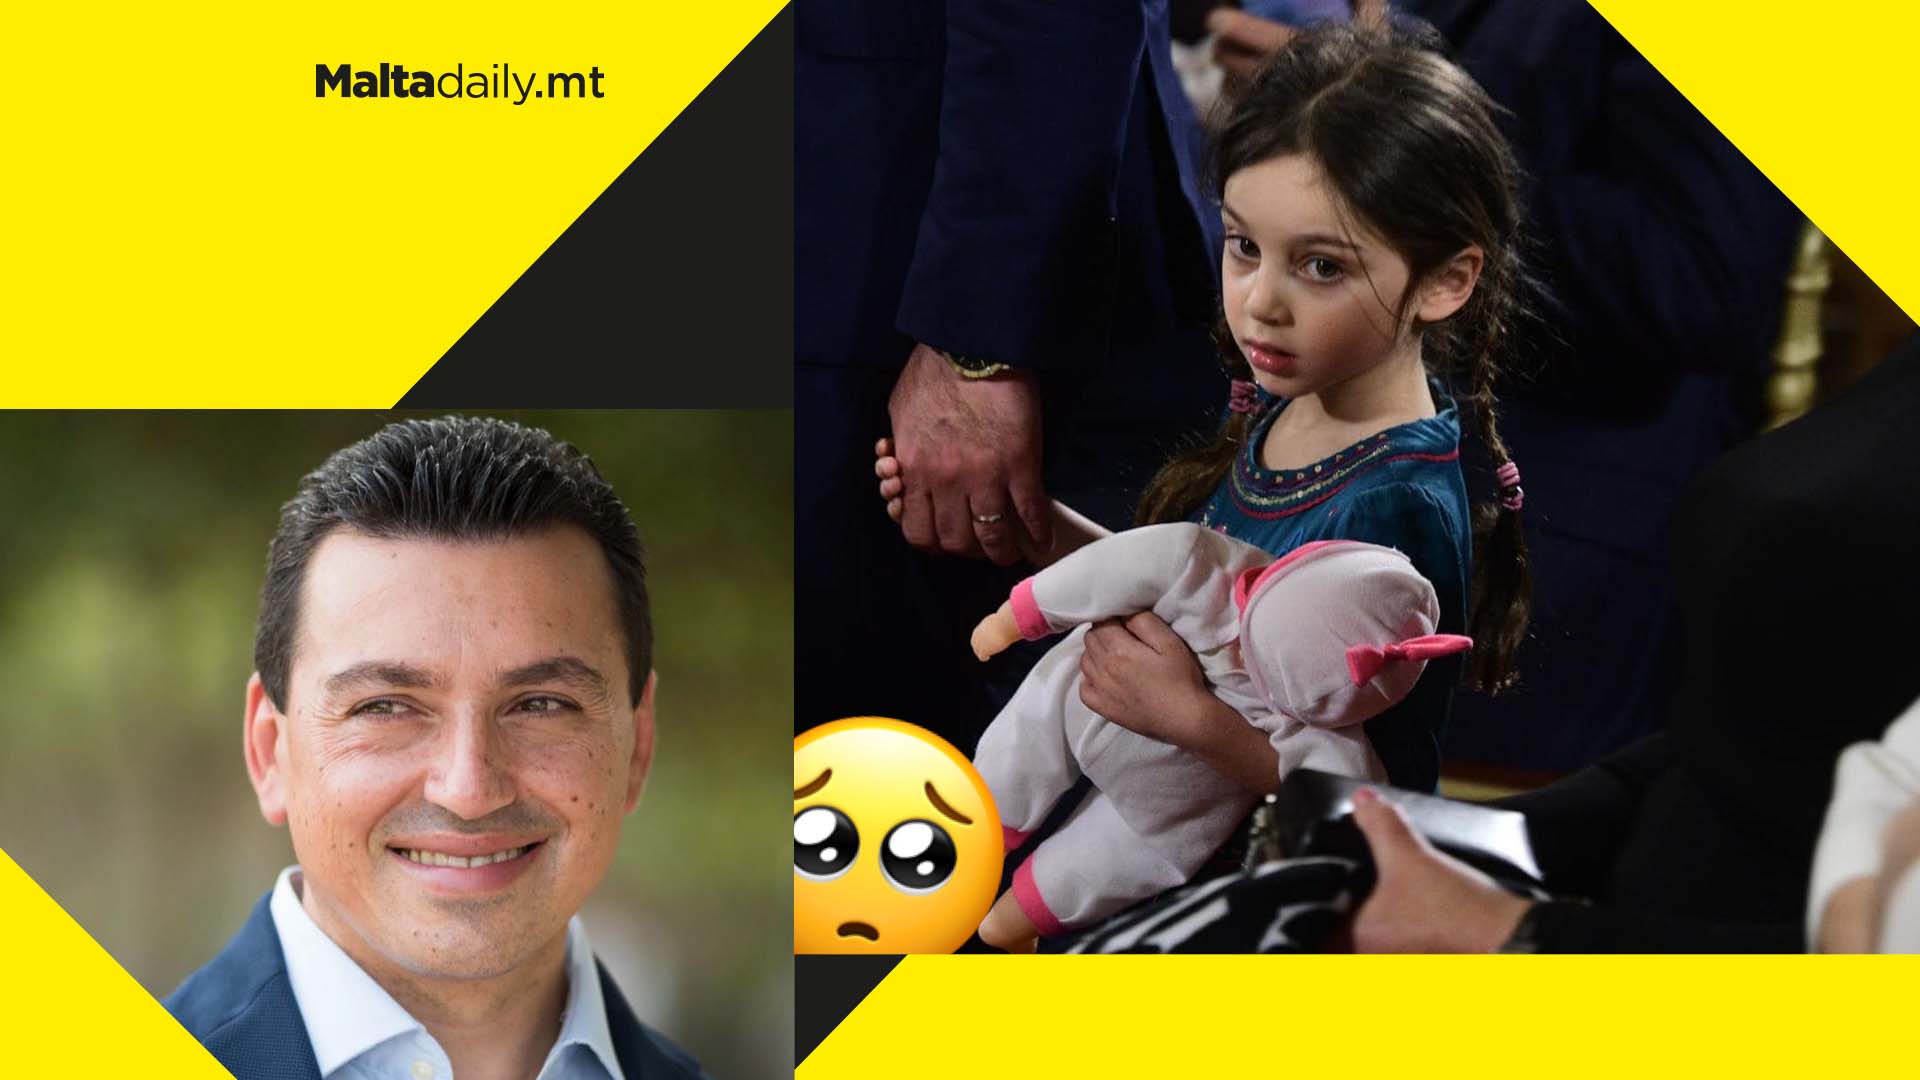 Aaron Farrugia's daughter taking her soft toy to the swearing in ceremony is the cutest thing ever